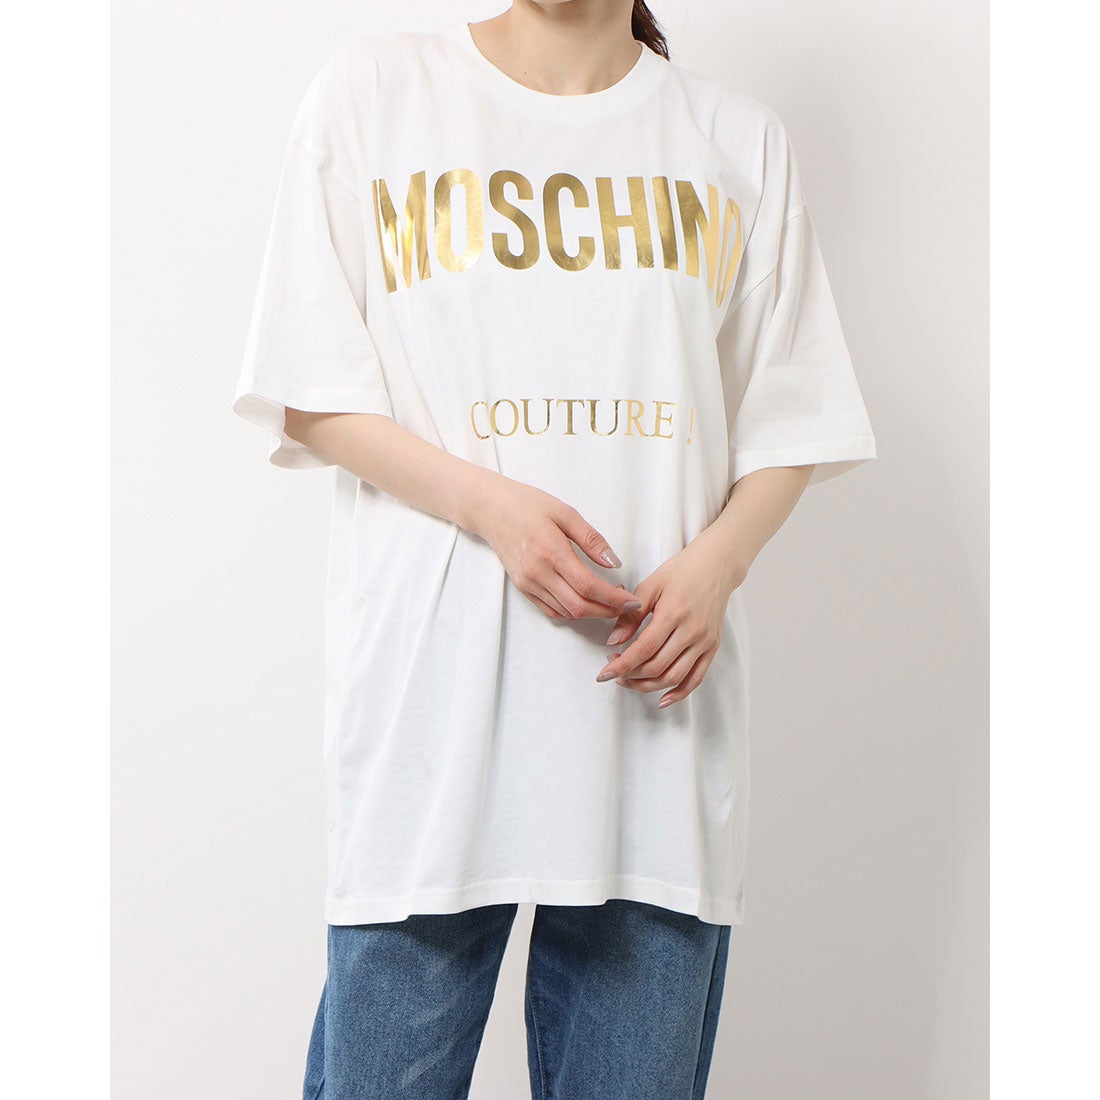 MOSCHINO COUTURE!　Tシャツ　モスキーノ　新品　キッズ　90　赤